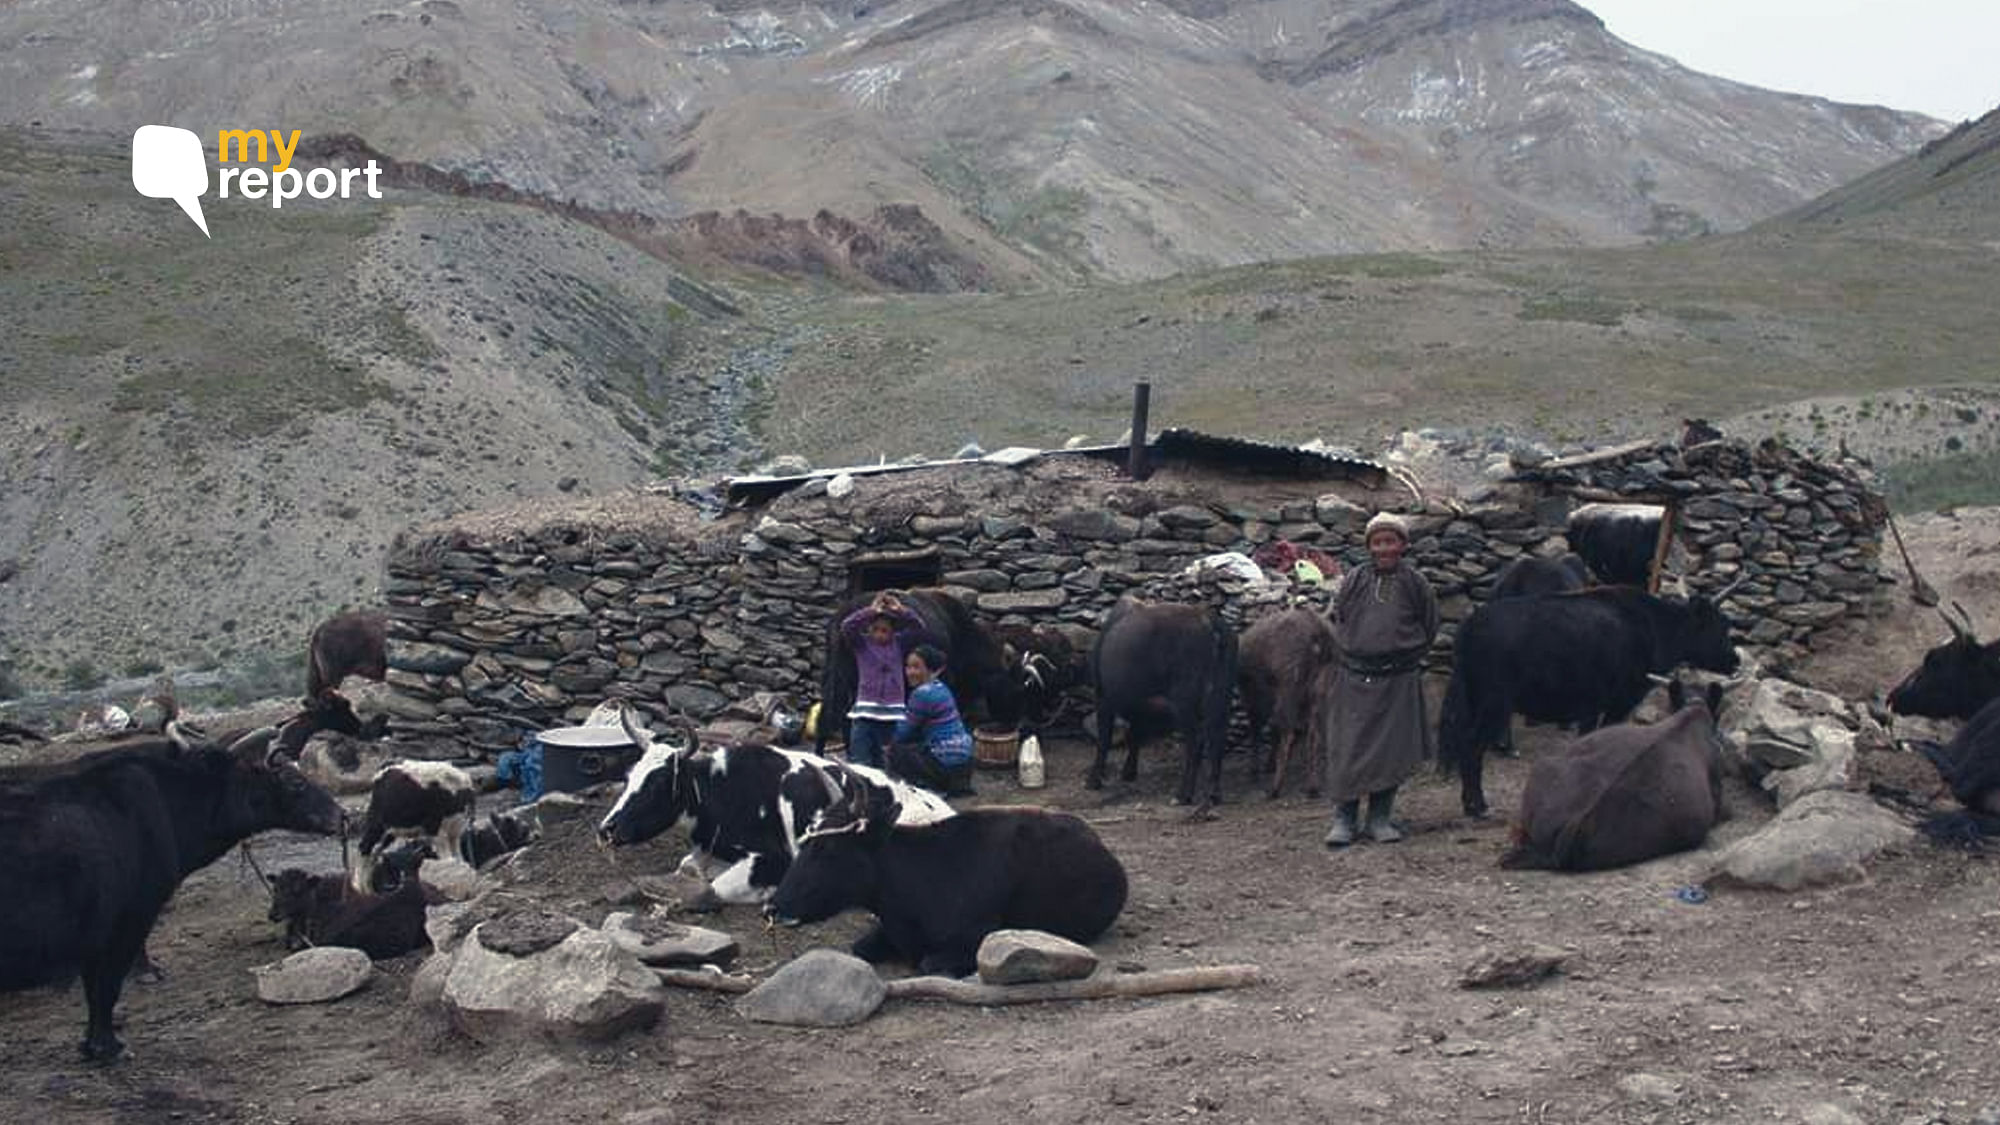 Rallakung and Shun Shaday in Zanskar sub-division of Kargil district are waiting for road connectivity to the village.